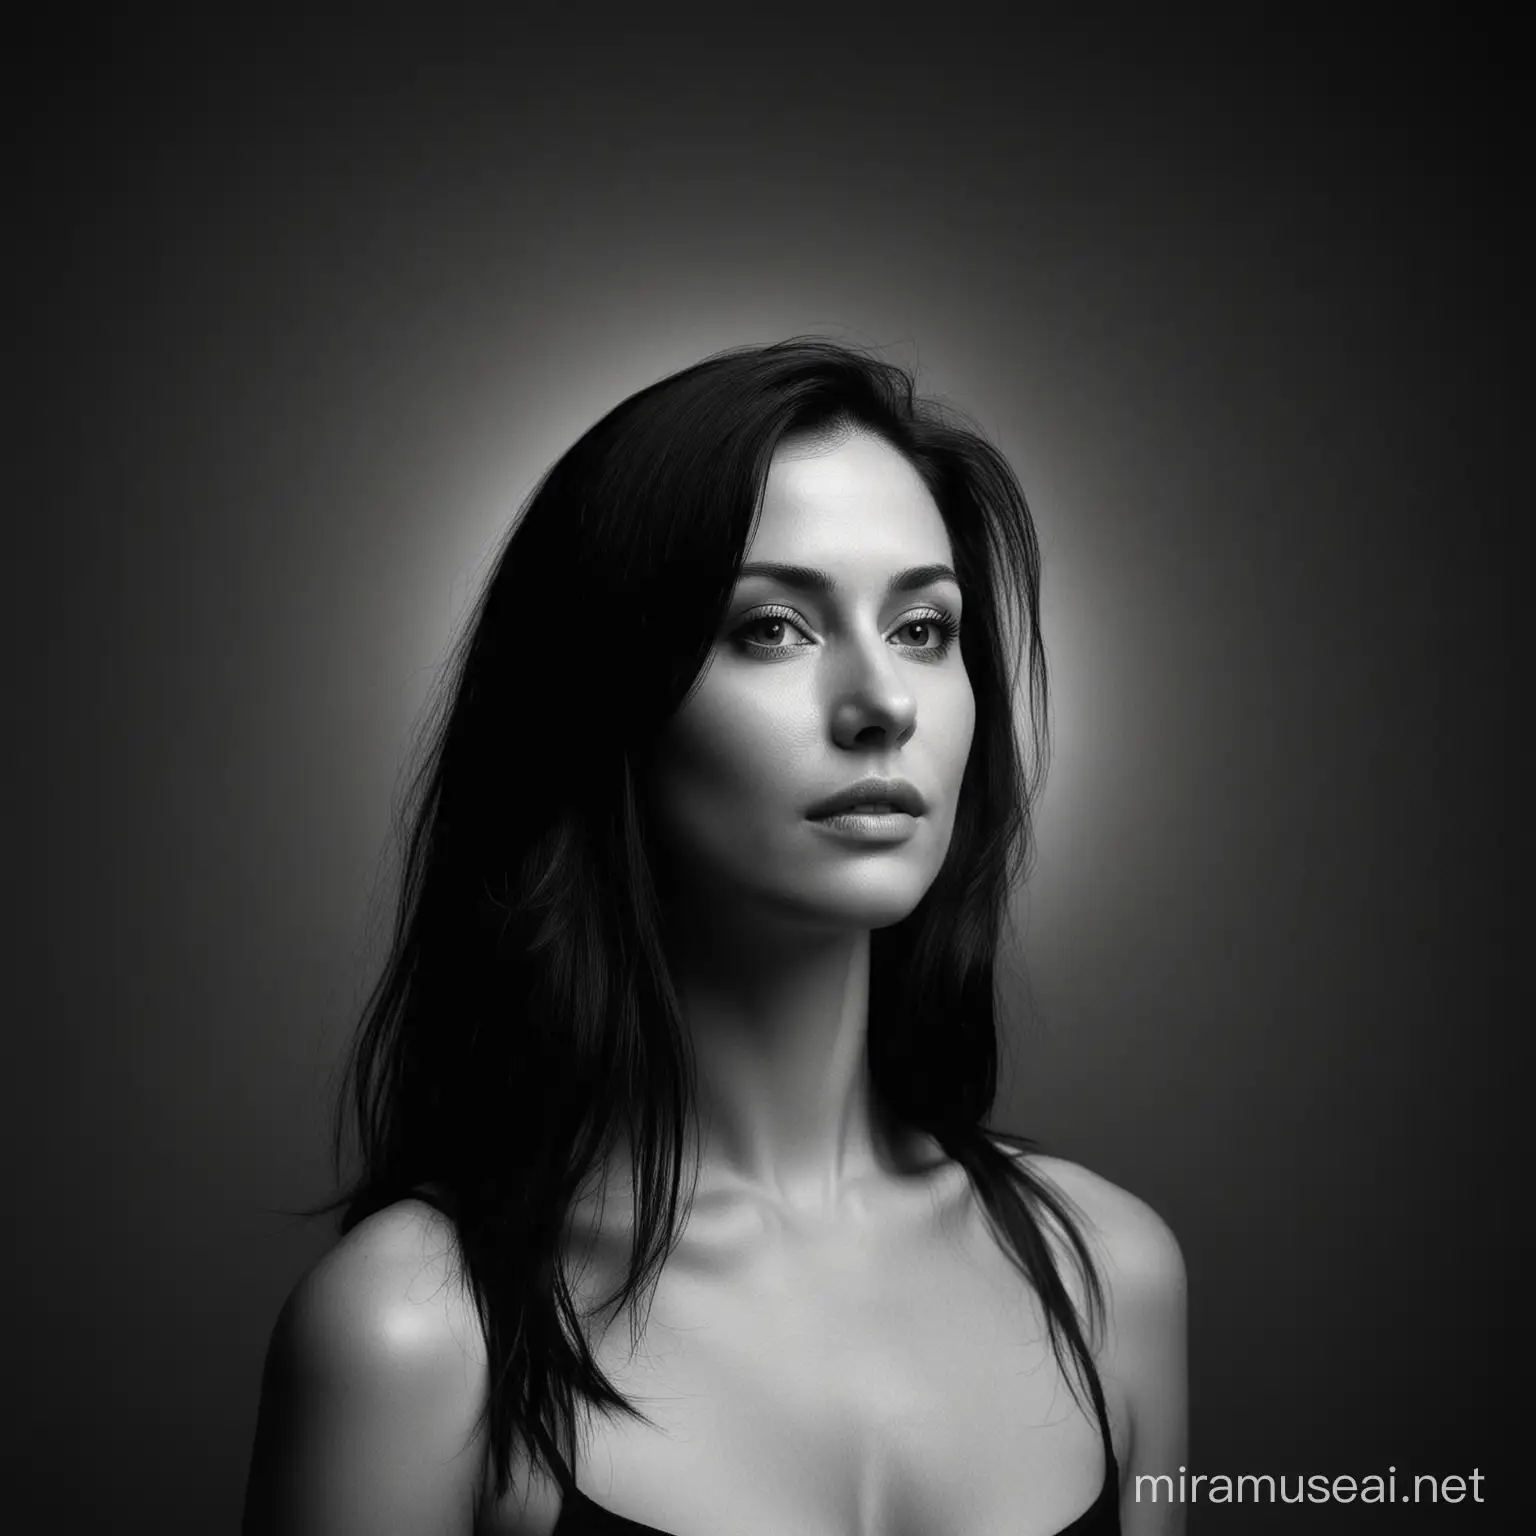 Black and white photography of the neck and head of a beautiful 30 year old woman with oval face and very rich and very long black hair. The camera shoots from her left side en prophile. Her head is turned toward left Lights come on her face. She poses indoor in front of a dark wall. 